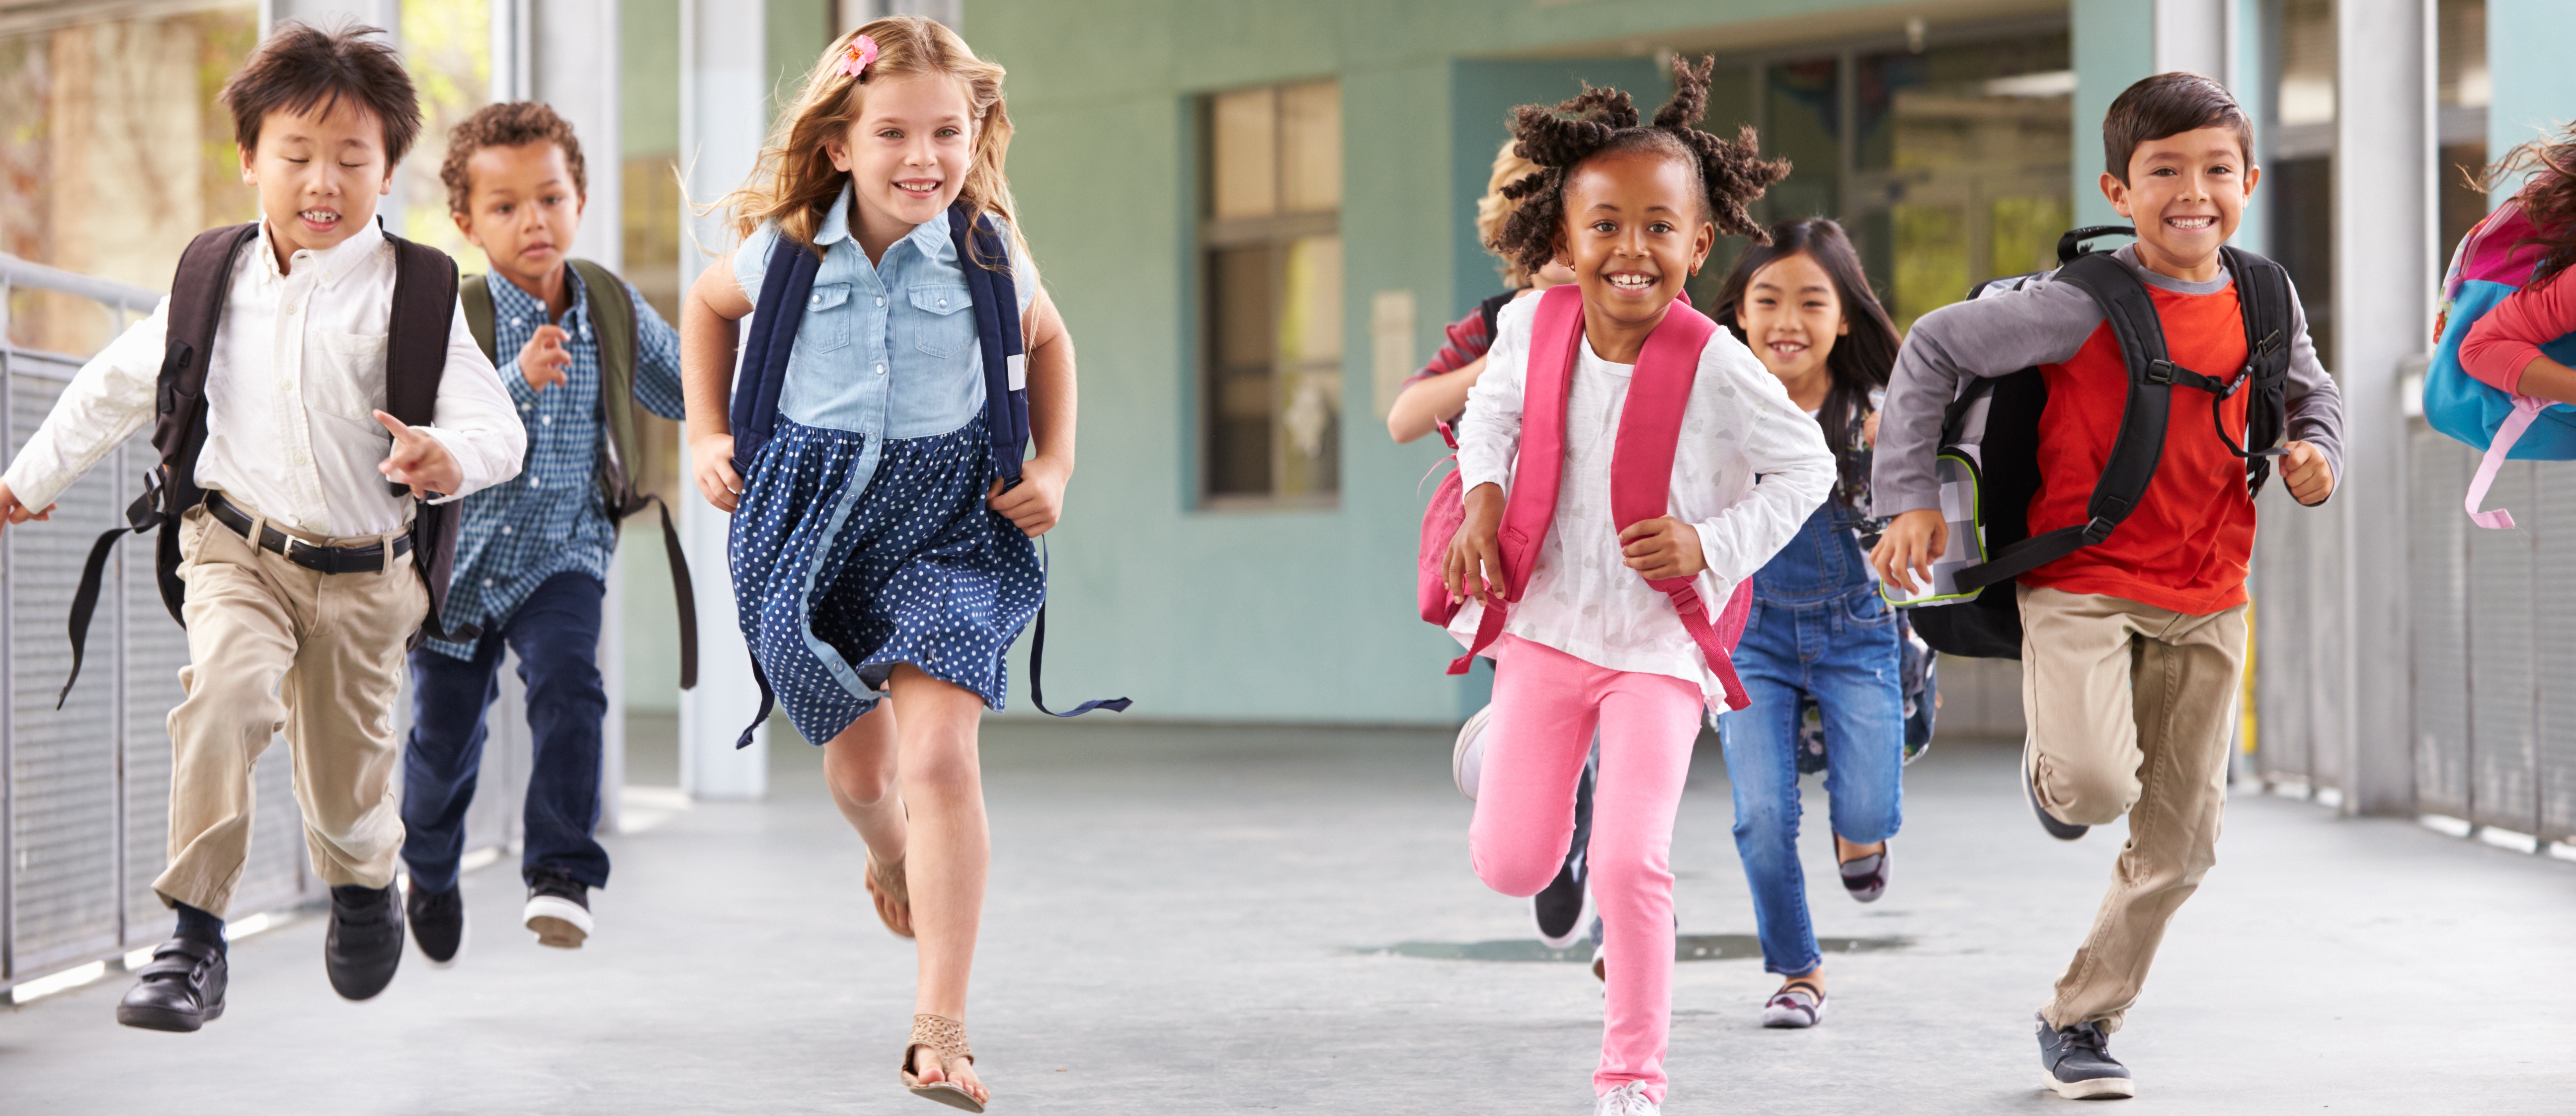 A diverse group of young children, wearing backpacks and smiling as they run across a school walkway